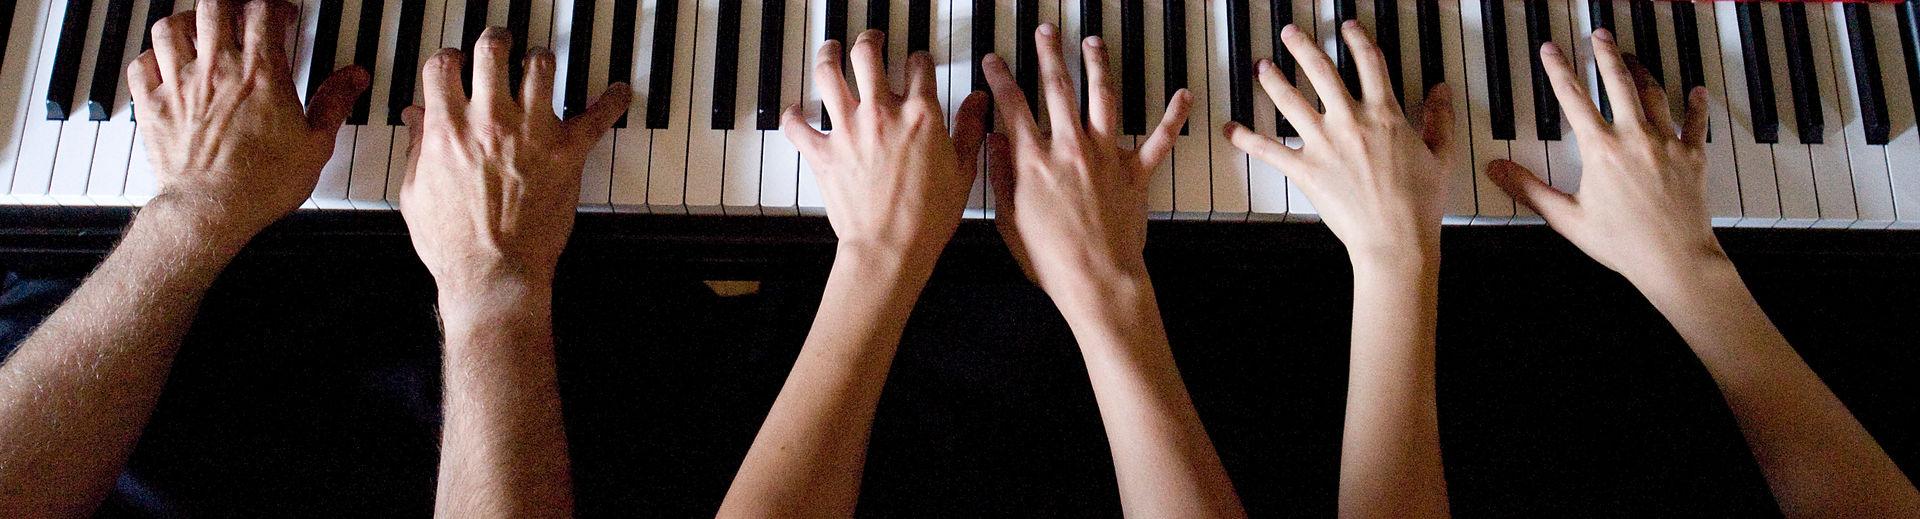 Three pairs of hands playing the piano